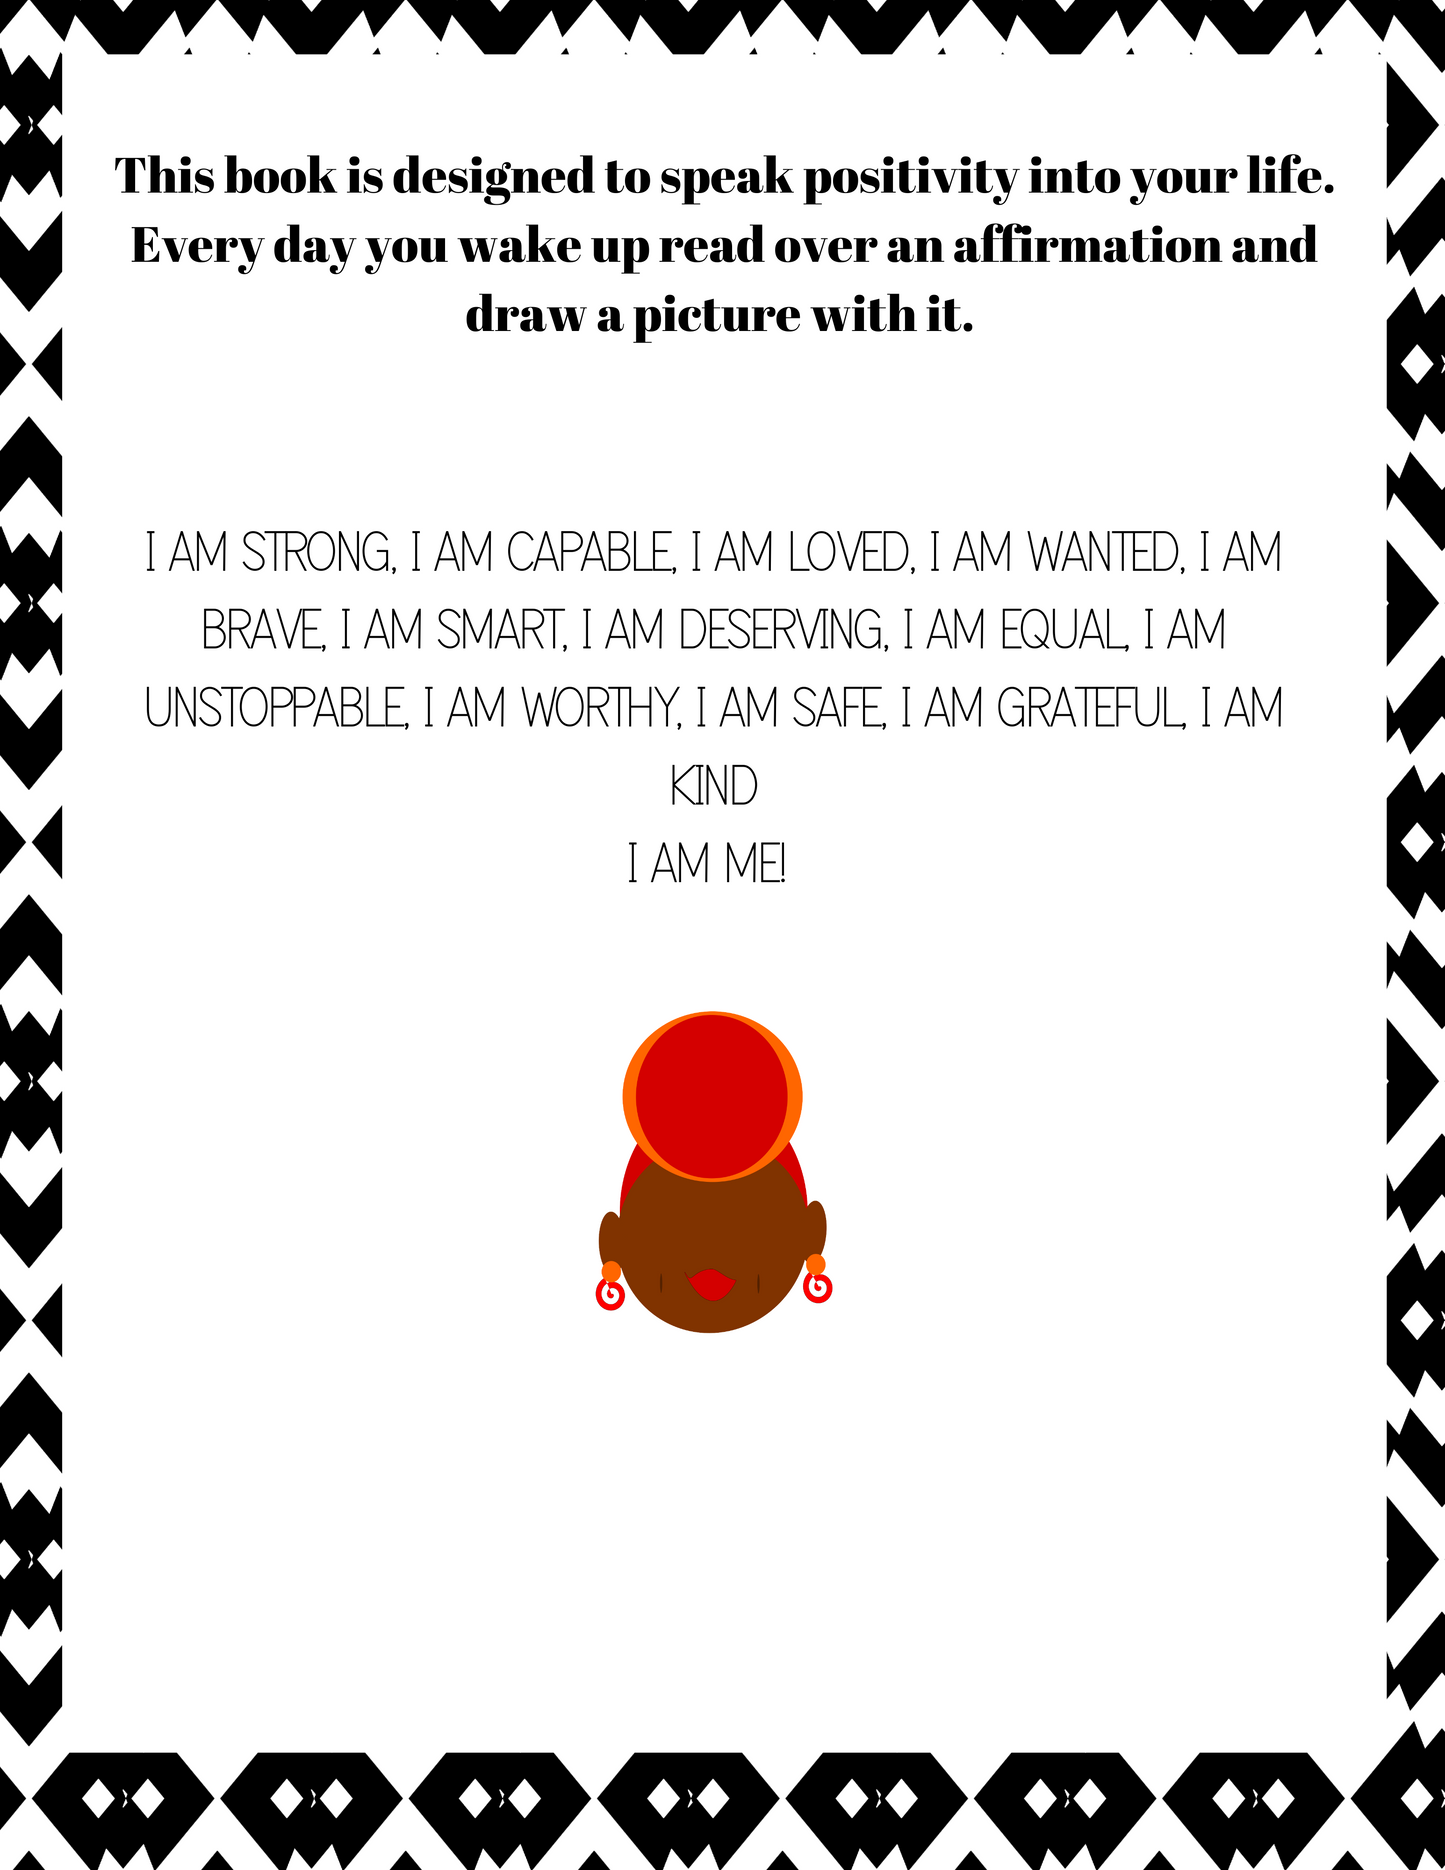 Daily Affirmations for Everyone